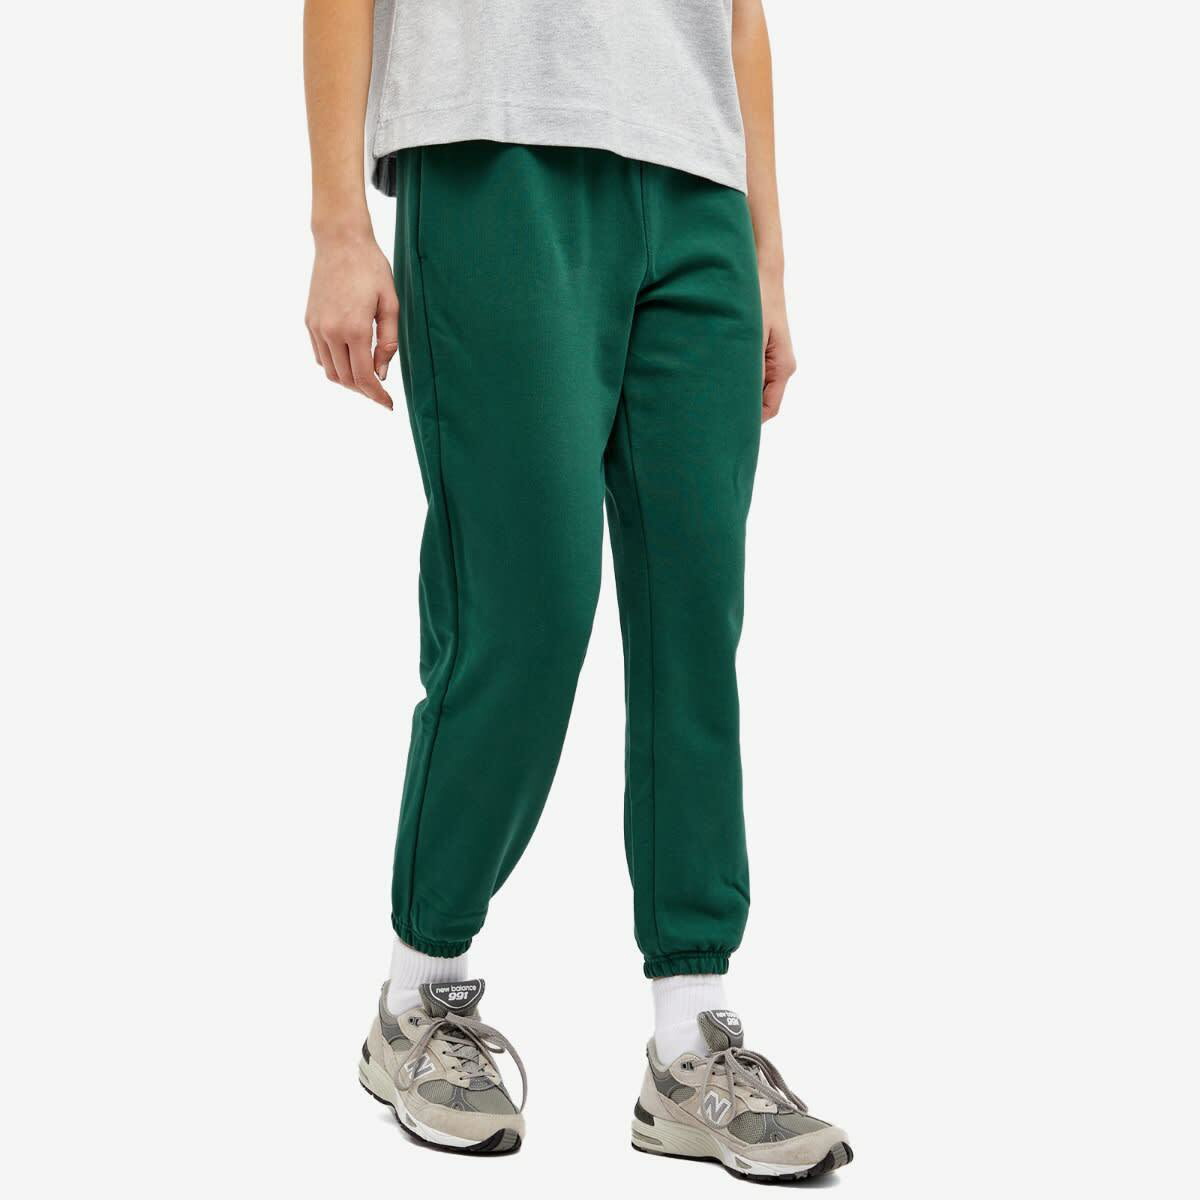 New Balance Women's Athletics Remastered French Terry Pant in